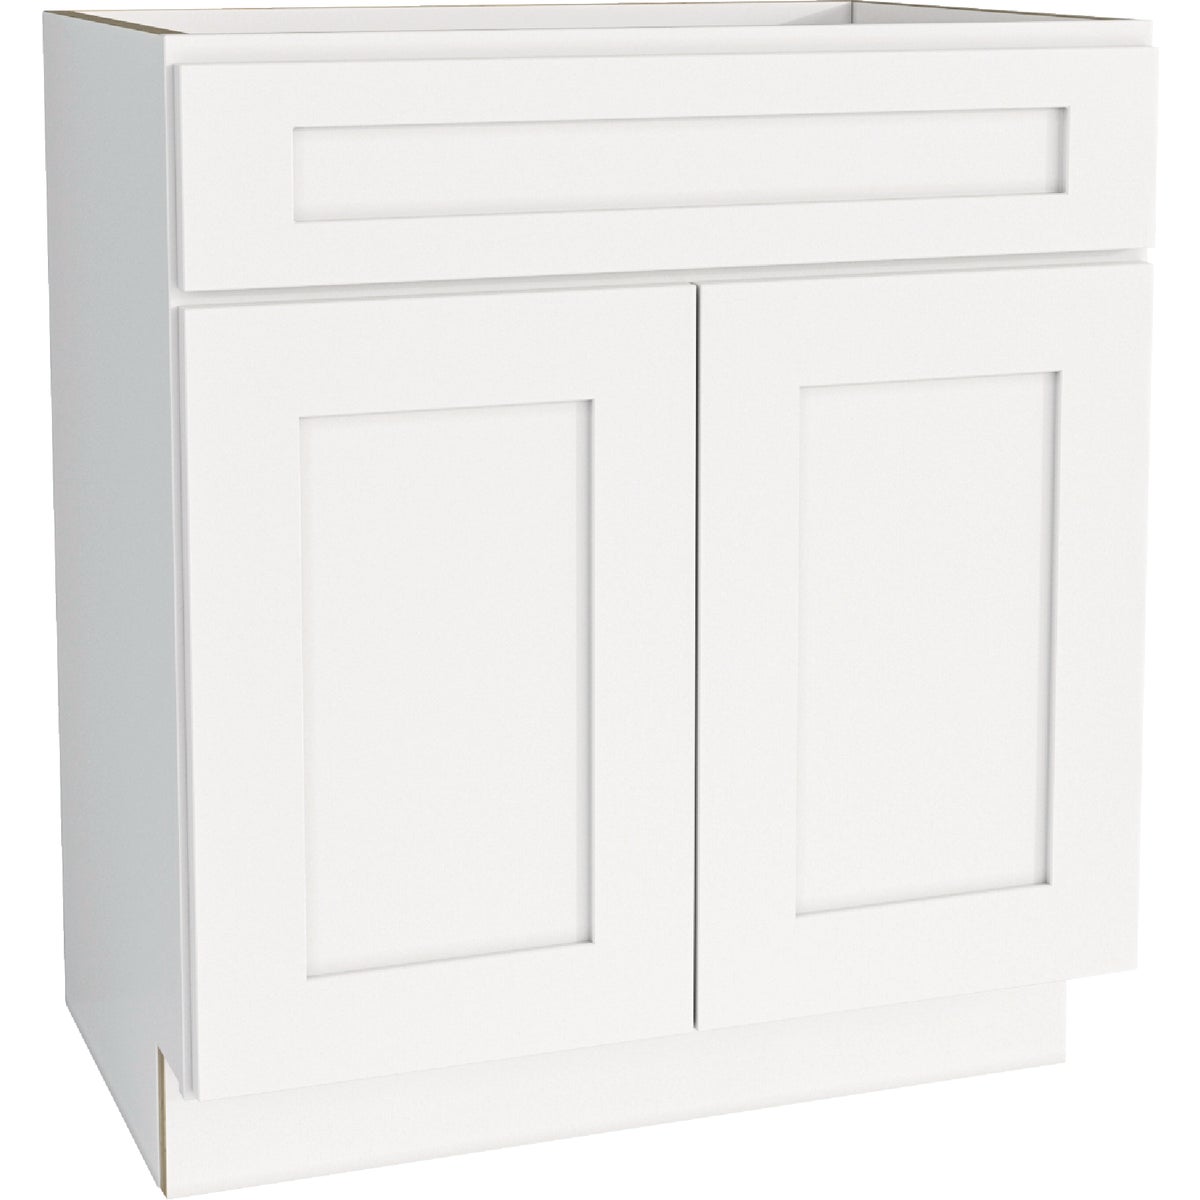 CraftMark Plymouth Shaker 30 In. W x 24 In. D x 34.5 In. H Ready To Assemble White Base Kitchen Cabinet